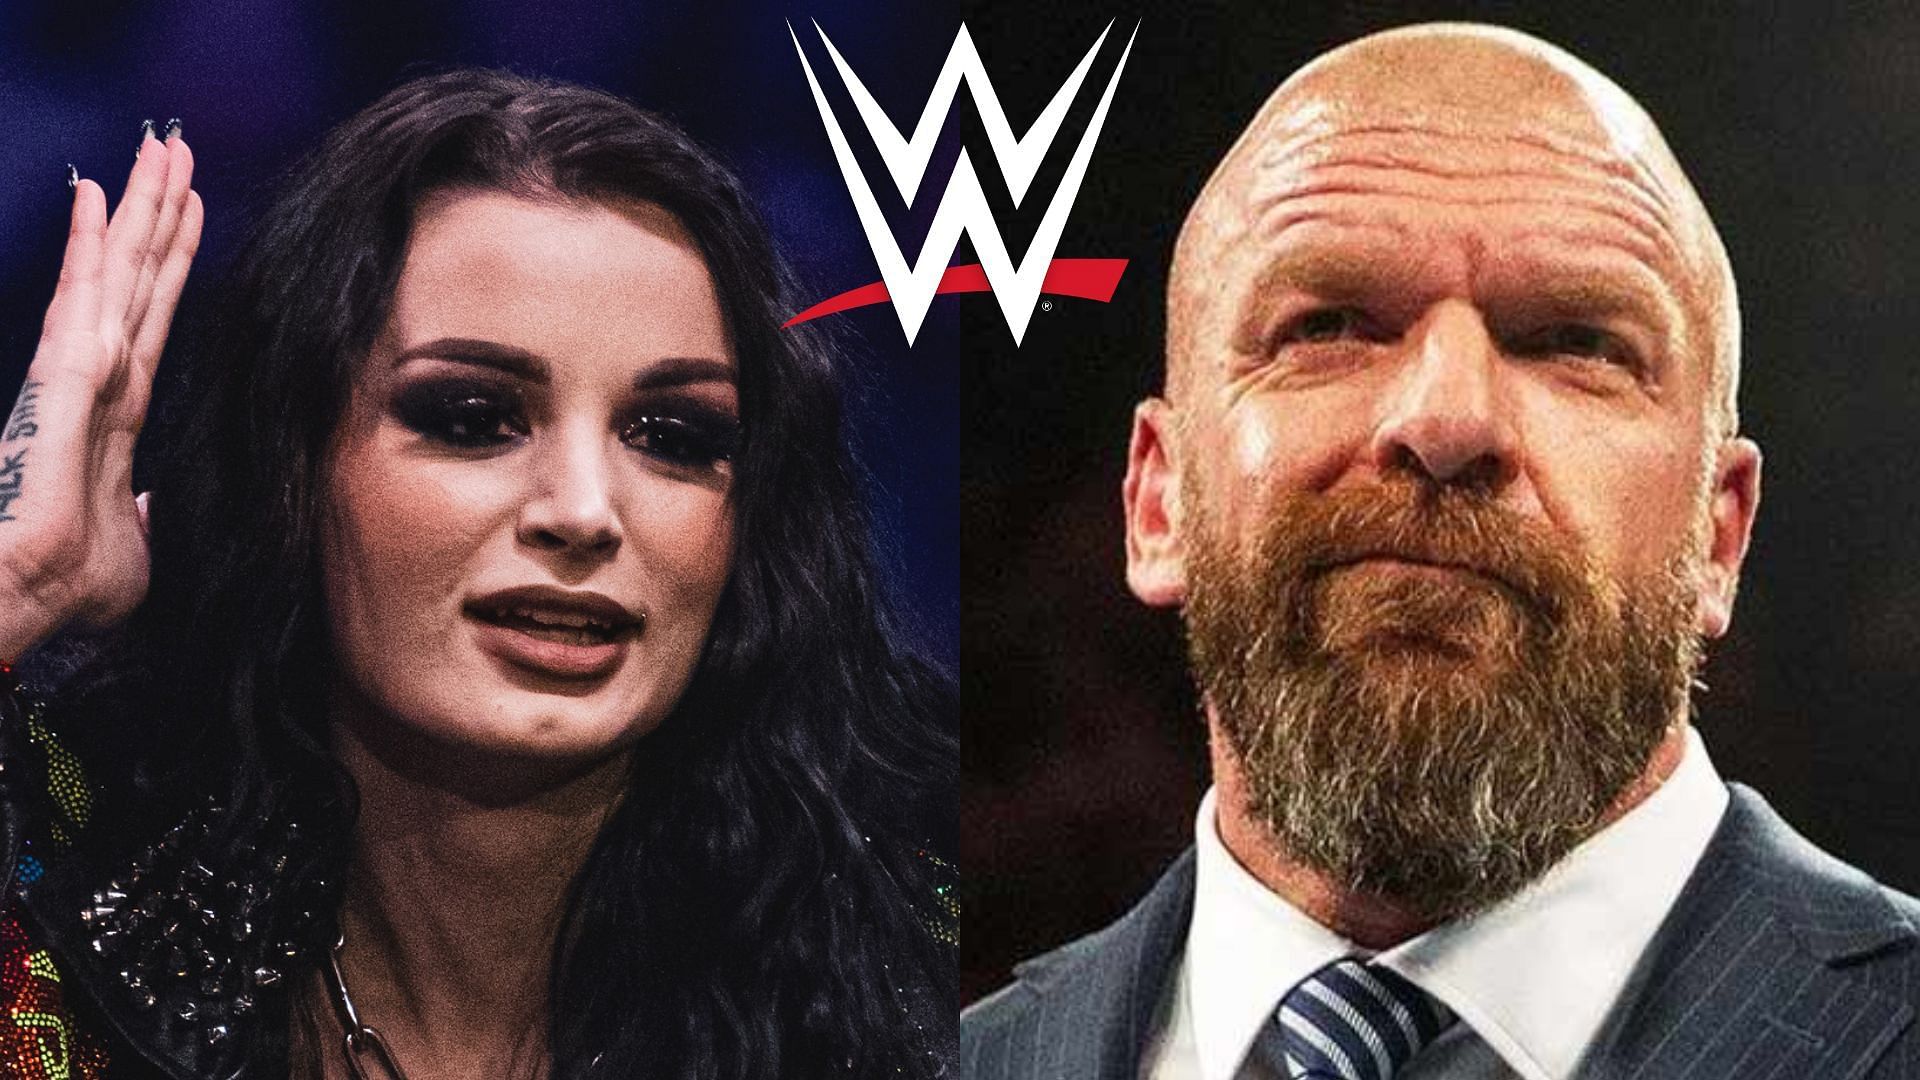 What did Saraya and Triple H talk about before she went to AEW?